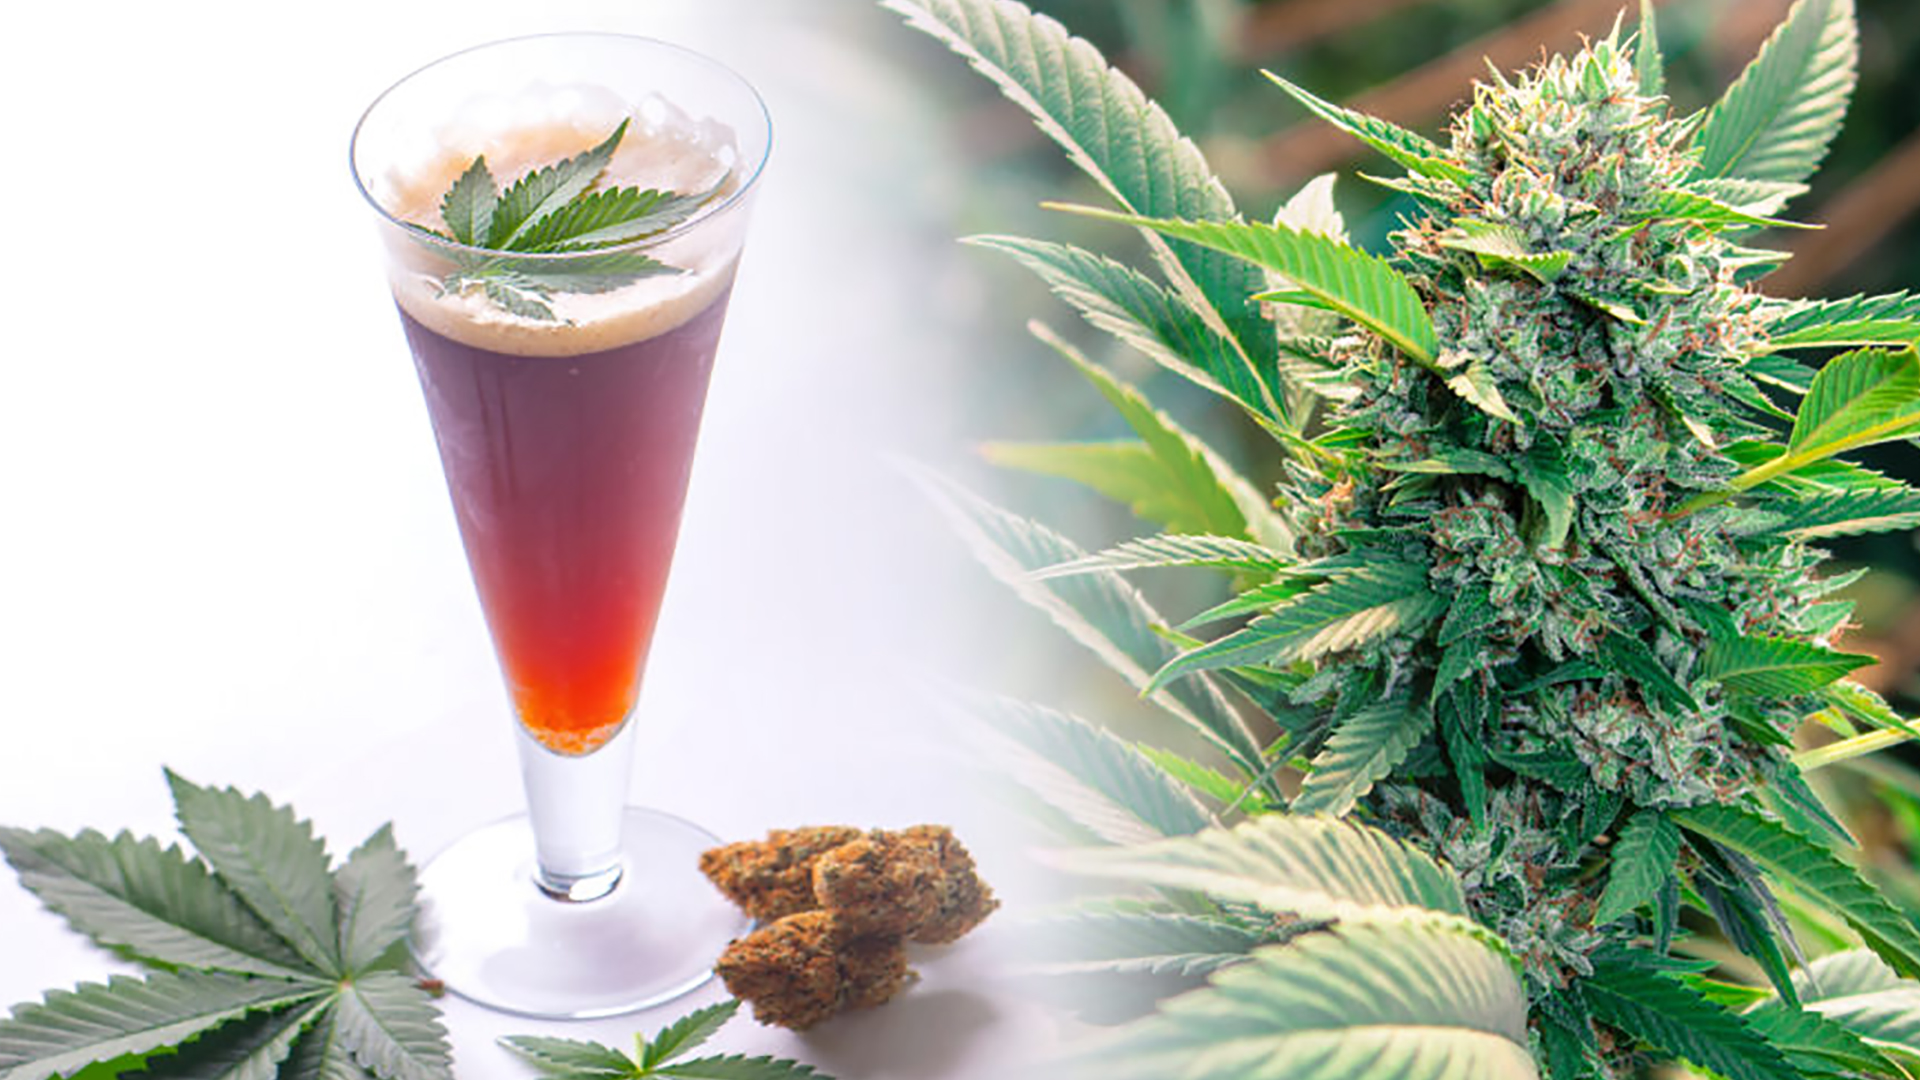 Cannabis Beverage Market Is Estimated to Witness High Growth Owing to Increasing Consumer Awareness About Therapeutic Benefits